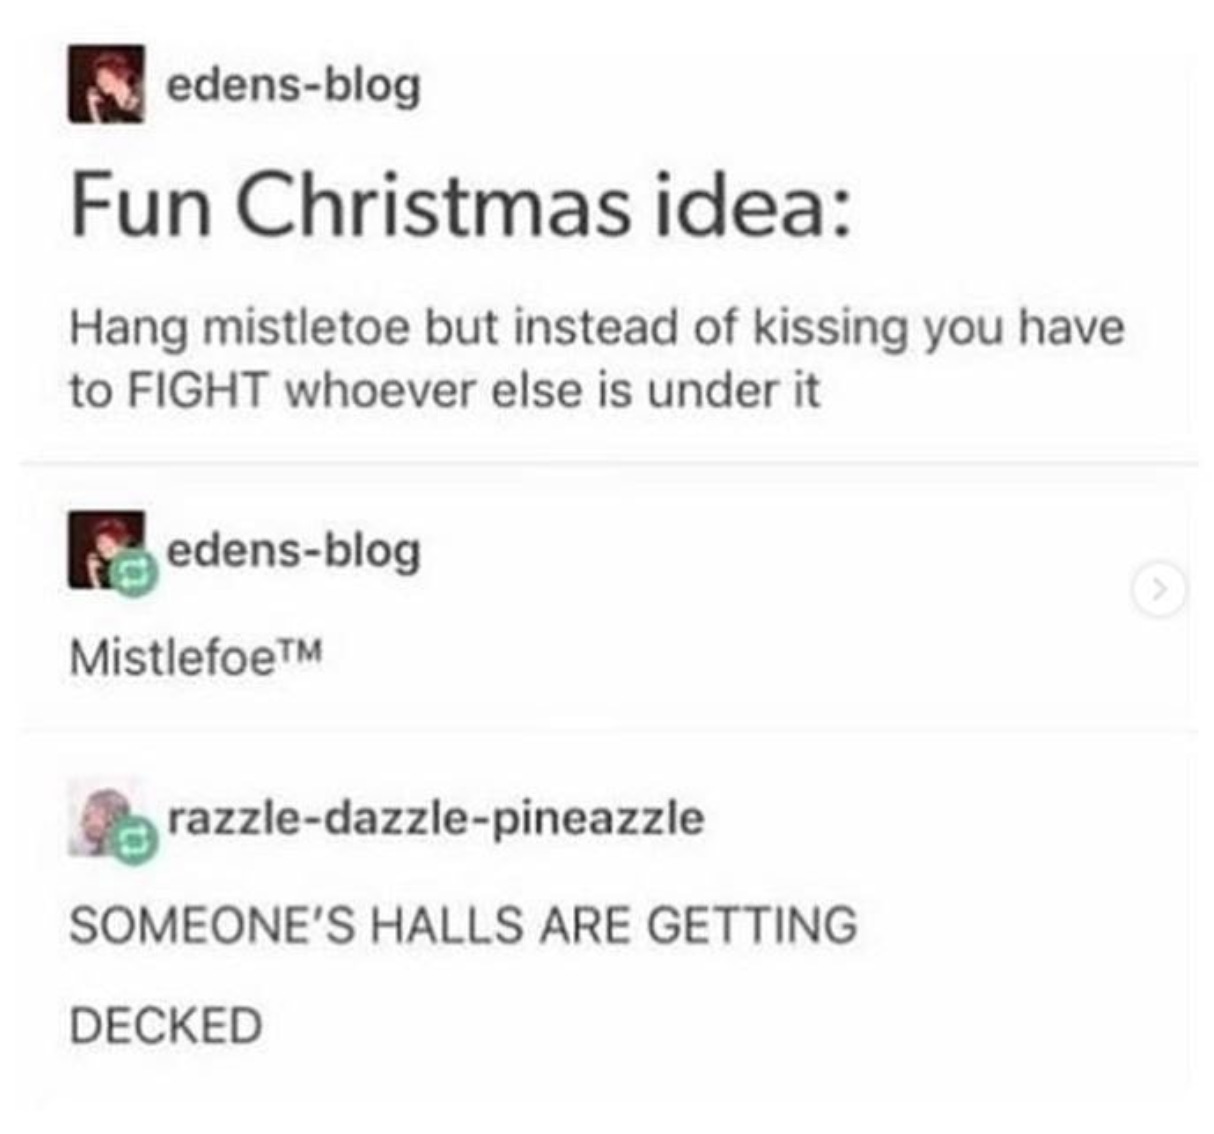 A tumblr post: Fun Christmas idea: Hang mistletoe but instead of kissing you have to FIGHT whoever else is under it. Reply: Mistlefoe Reply 2: SOMEONE'S HALLS ARE GETTING DECKED